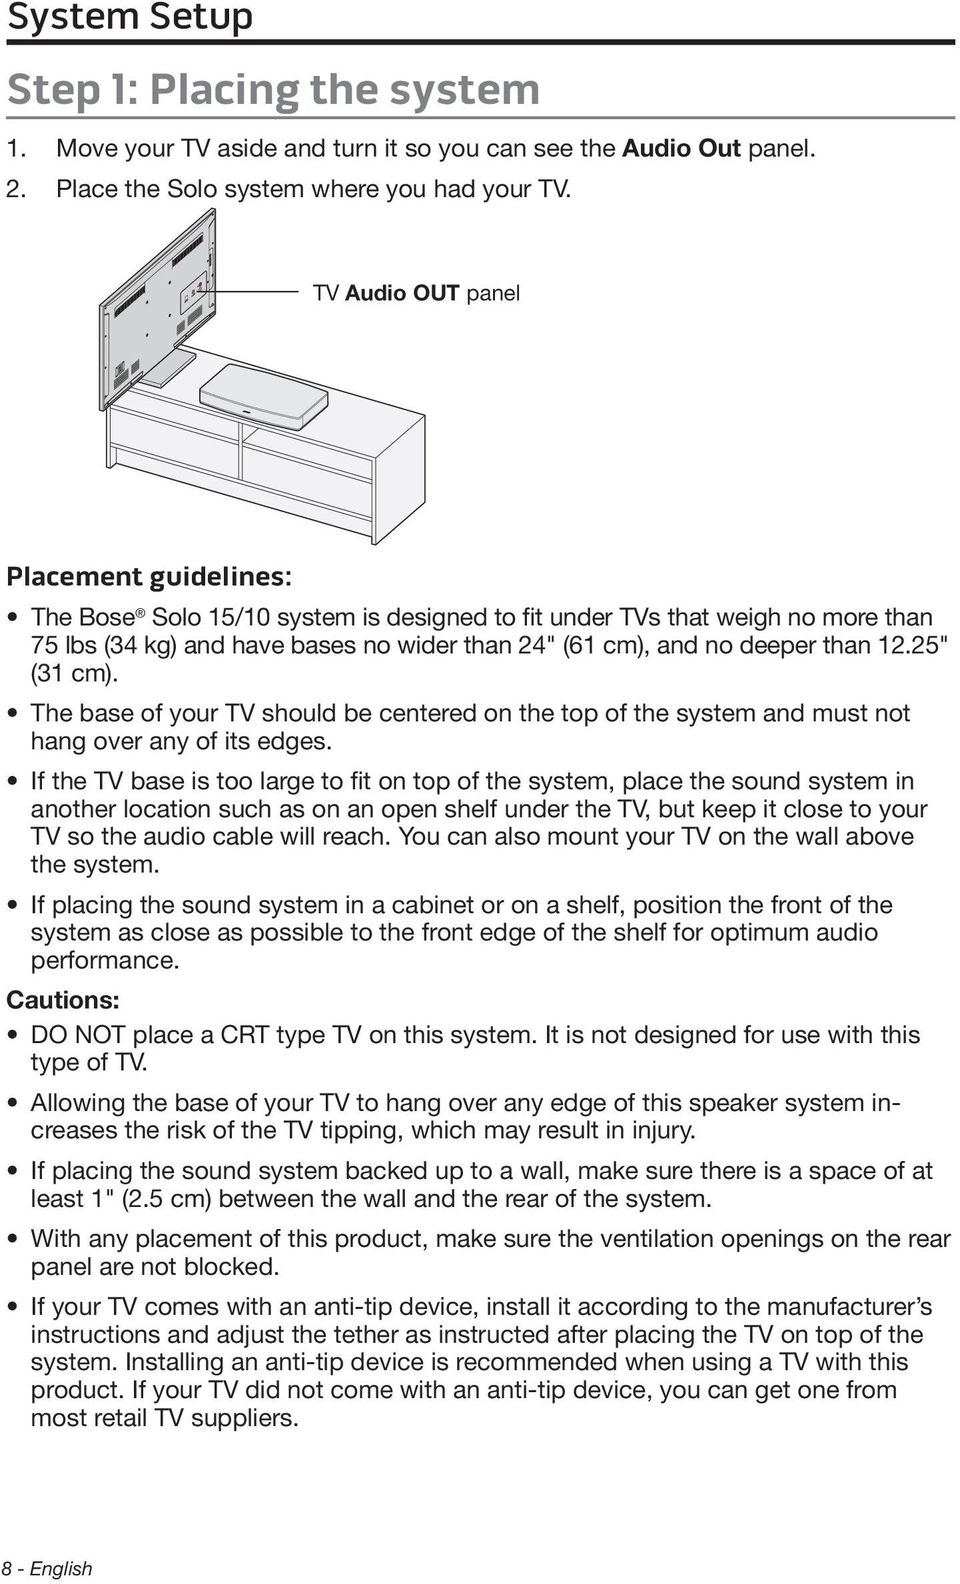 25" (31 cm). The base of your TV should be centered on the top of the system and must not hang over any of its edges.